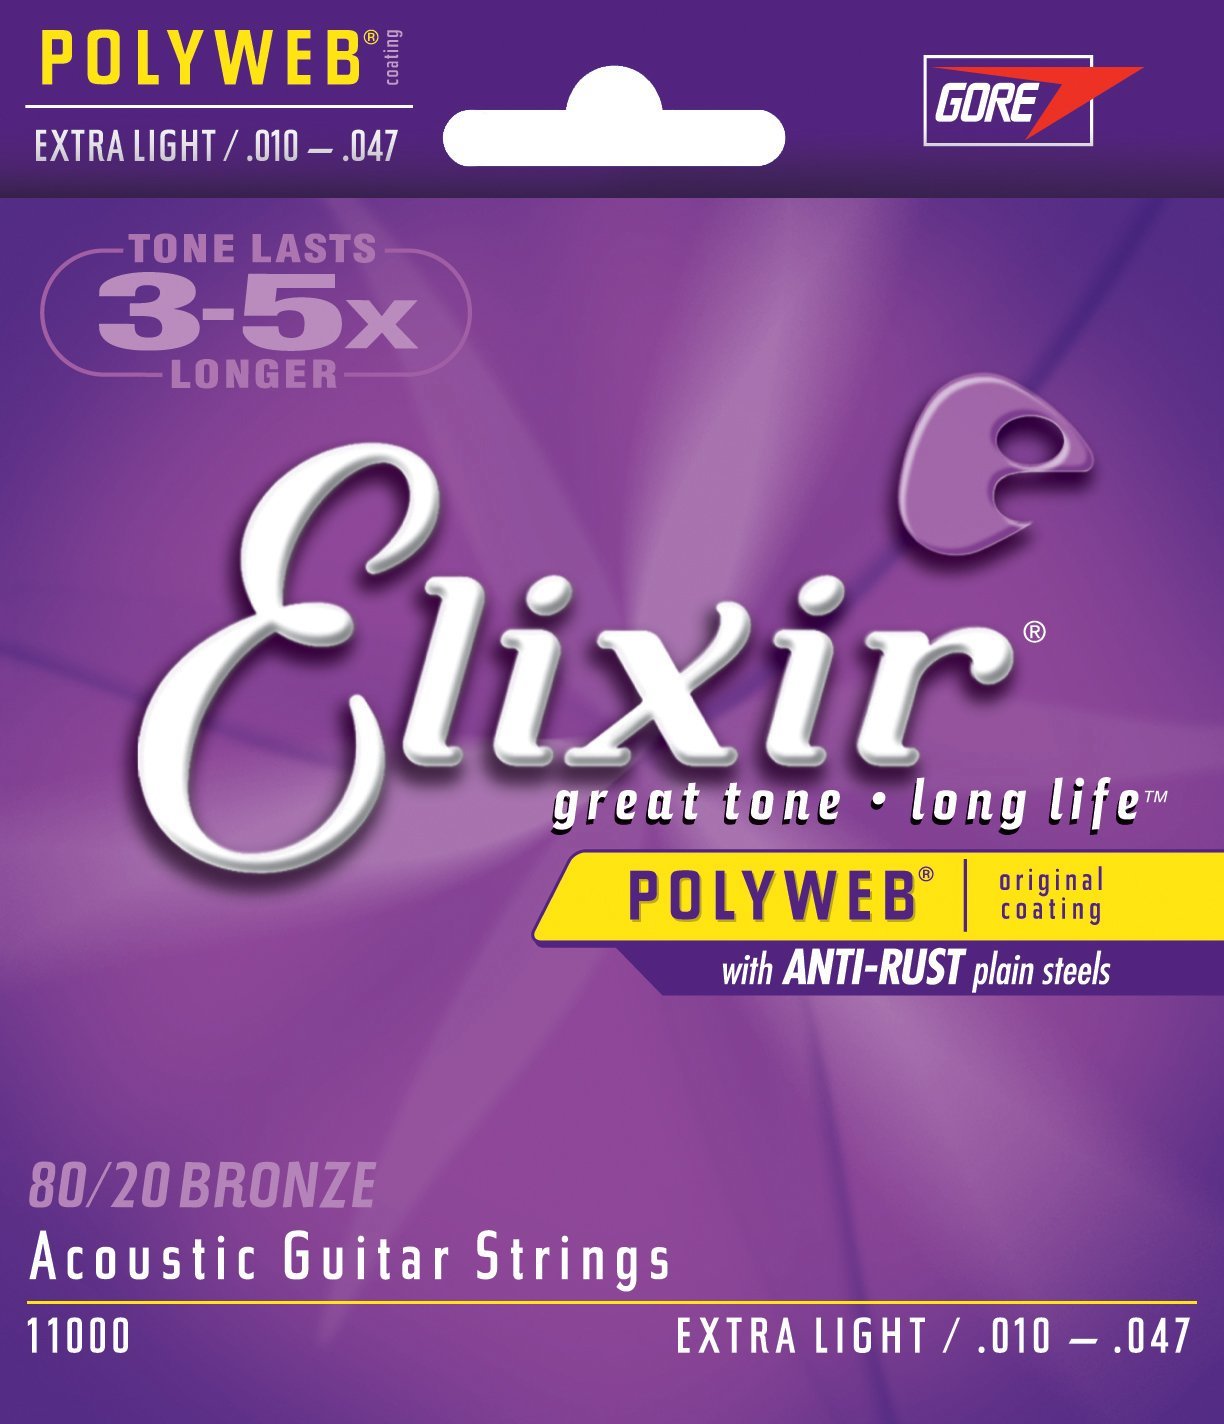 Elixir 11000 80/20 Bronze Acoustic Guitar Strings with POLYWEB Coating, Extra Light (.010-.047)